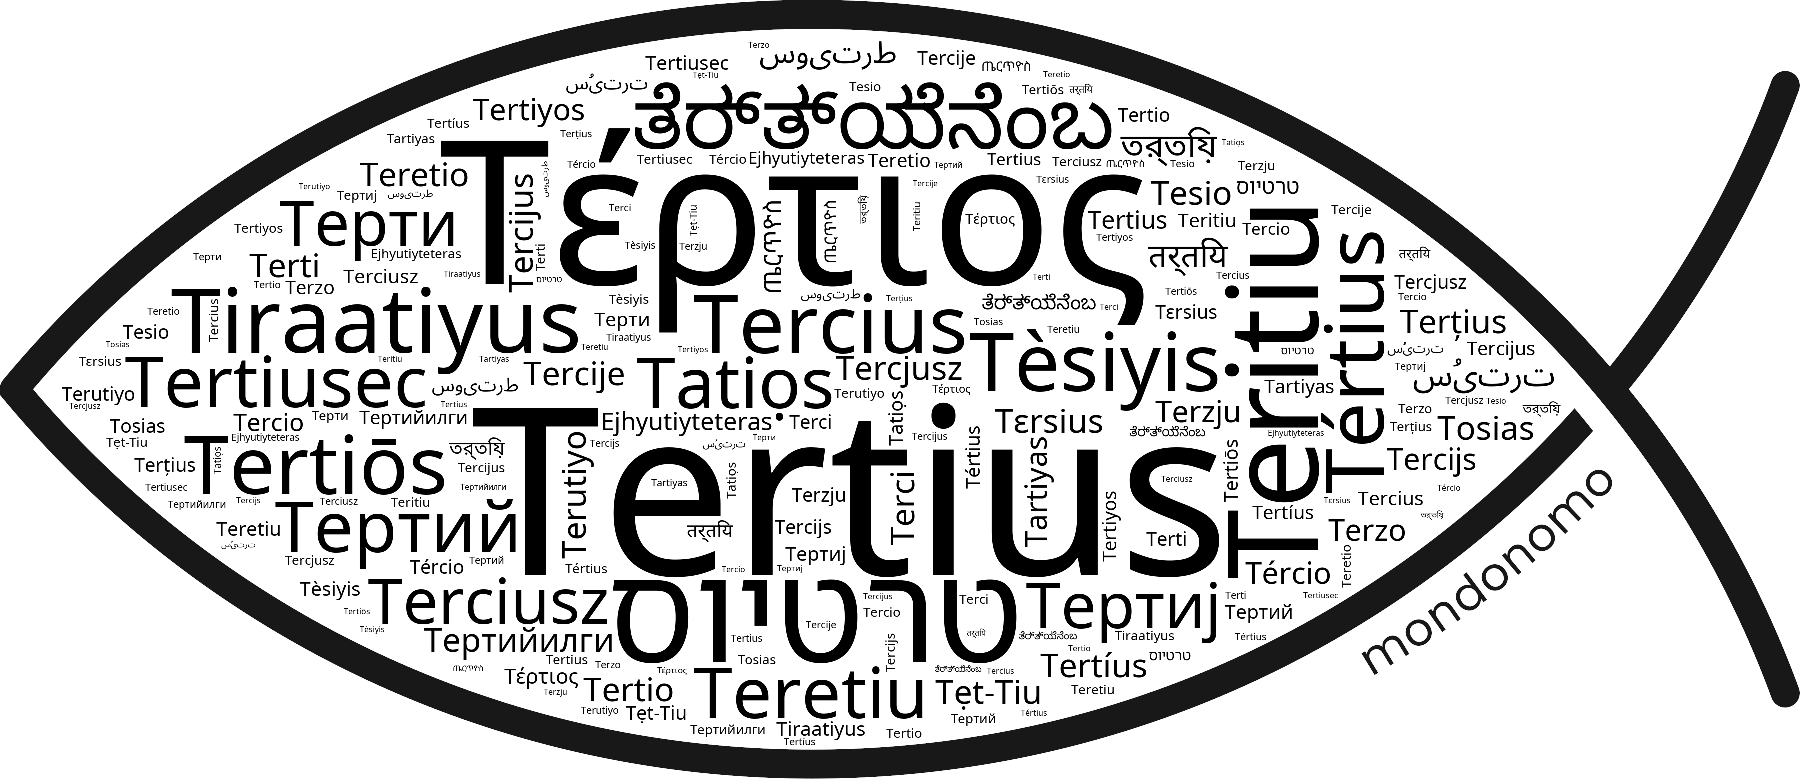 Name Tertius in the world's Bibles